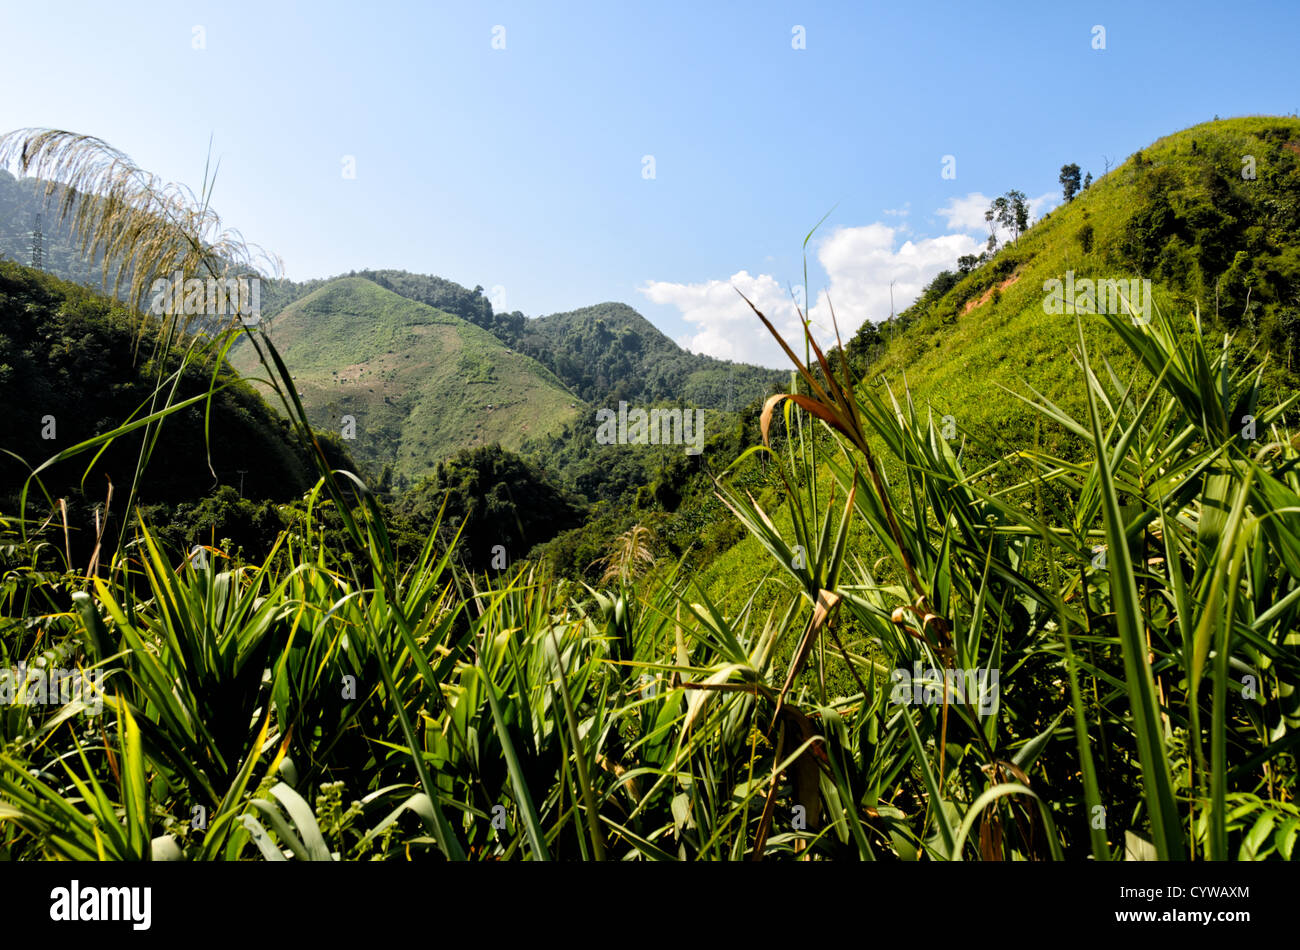 Some of the rugged mountainous landscape of the Luang Namtha region in northern Laos. Farmers grow mountain rice on the steep hillsides. Stock Photo